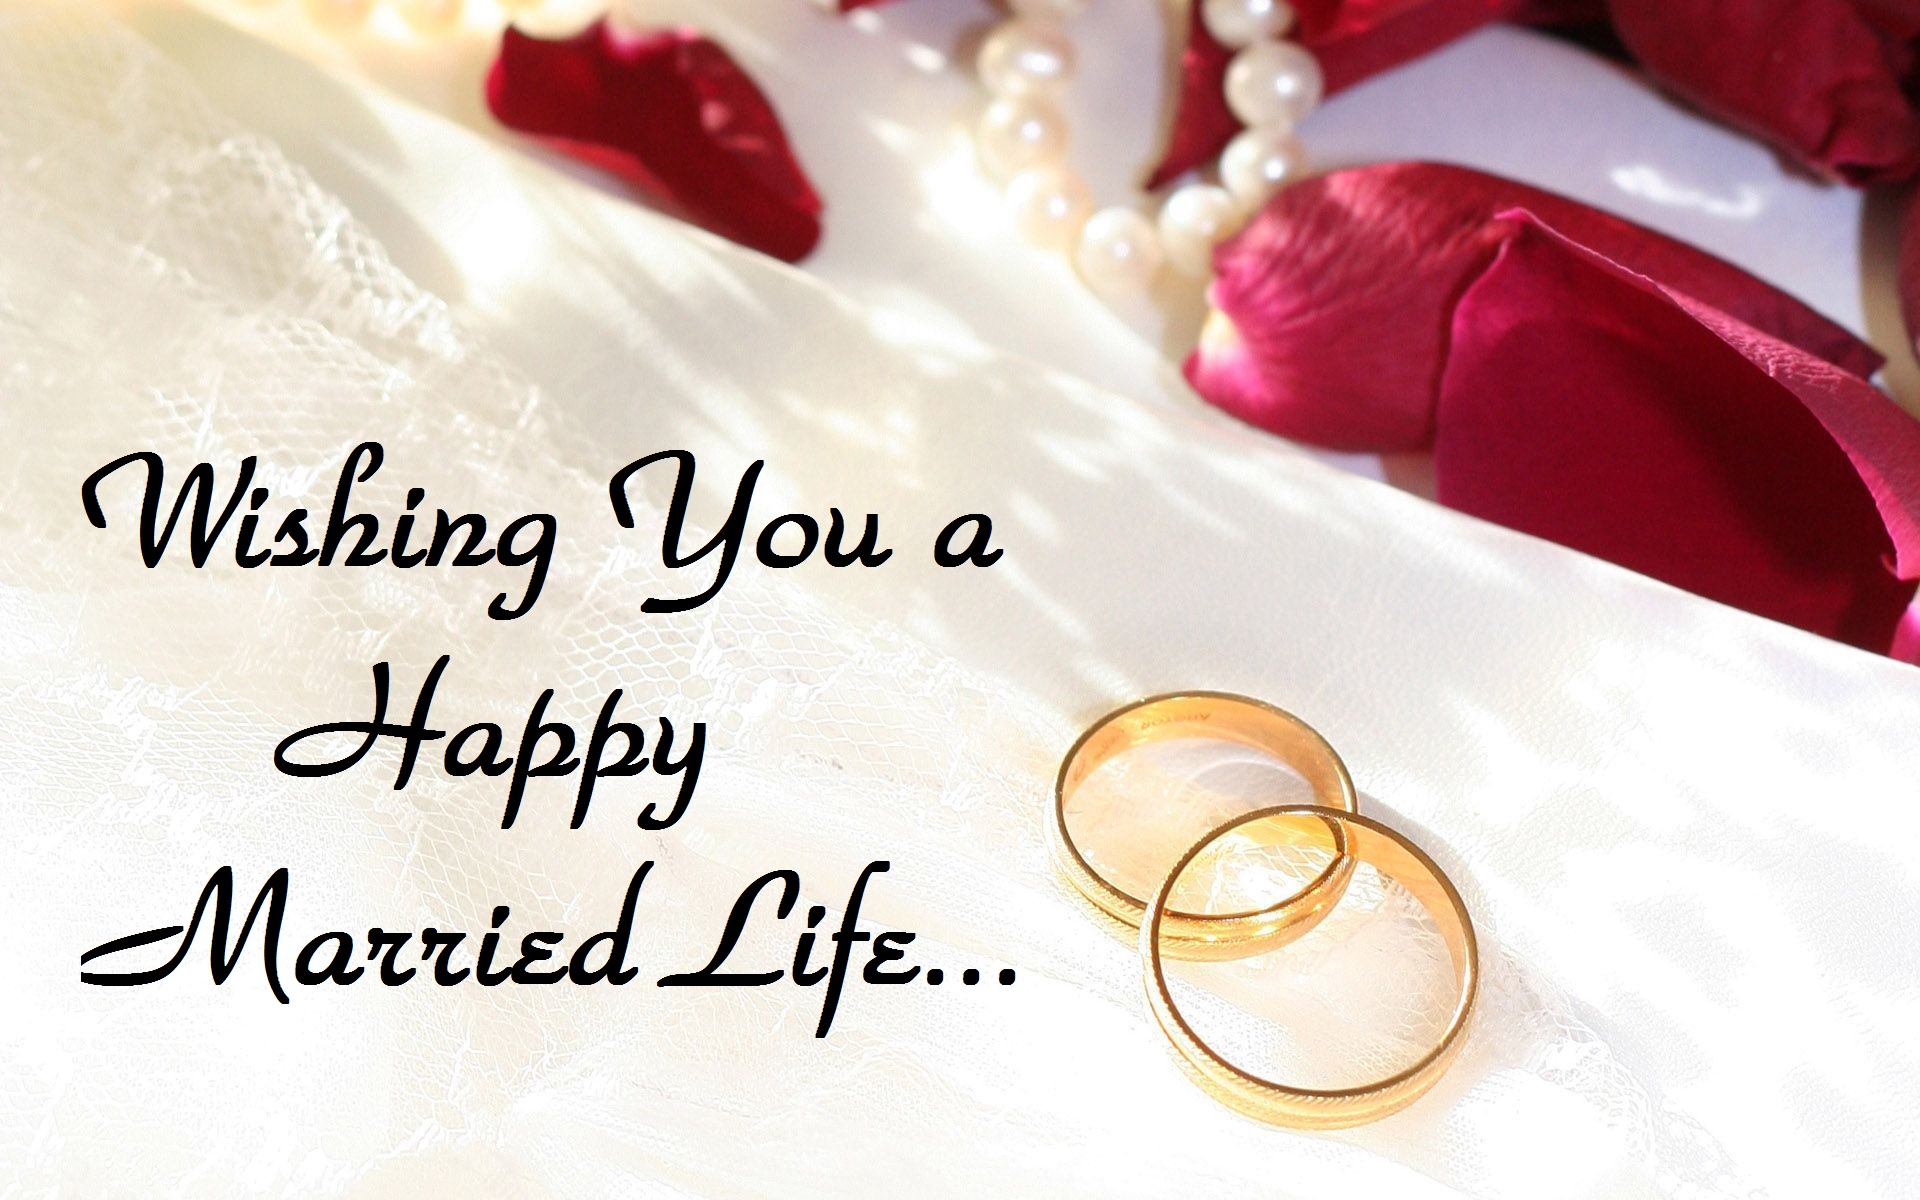 happy marriage wishes image